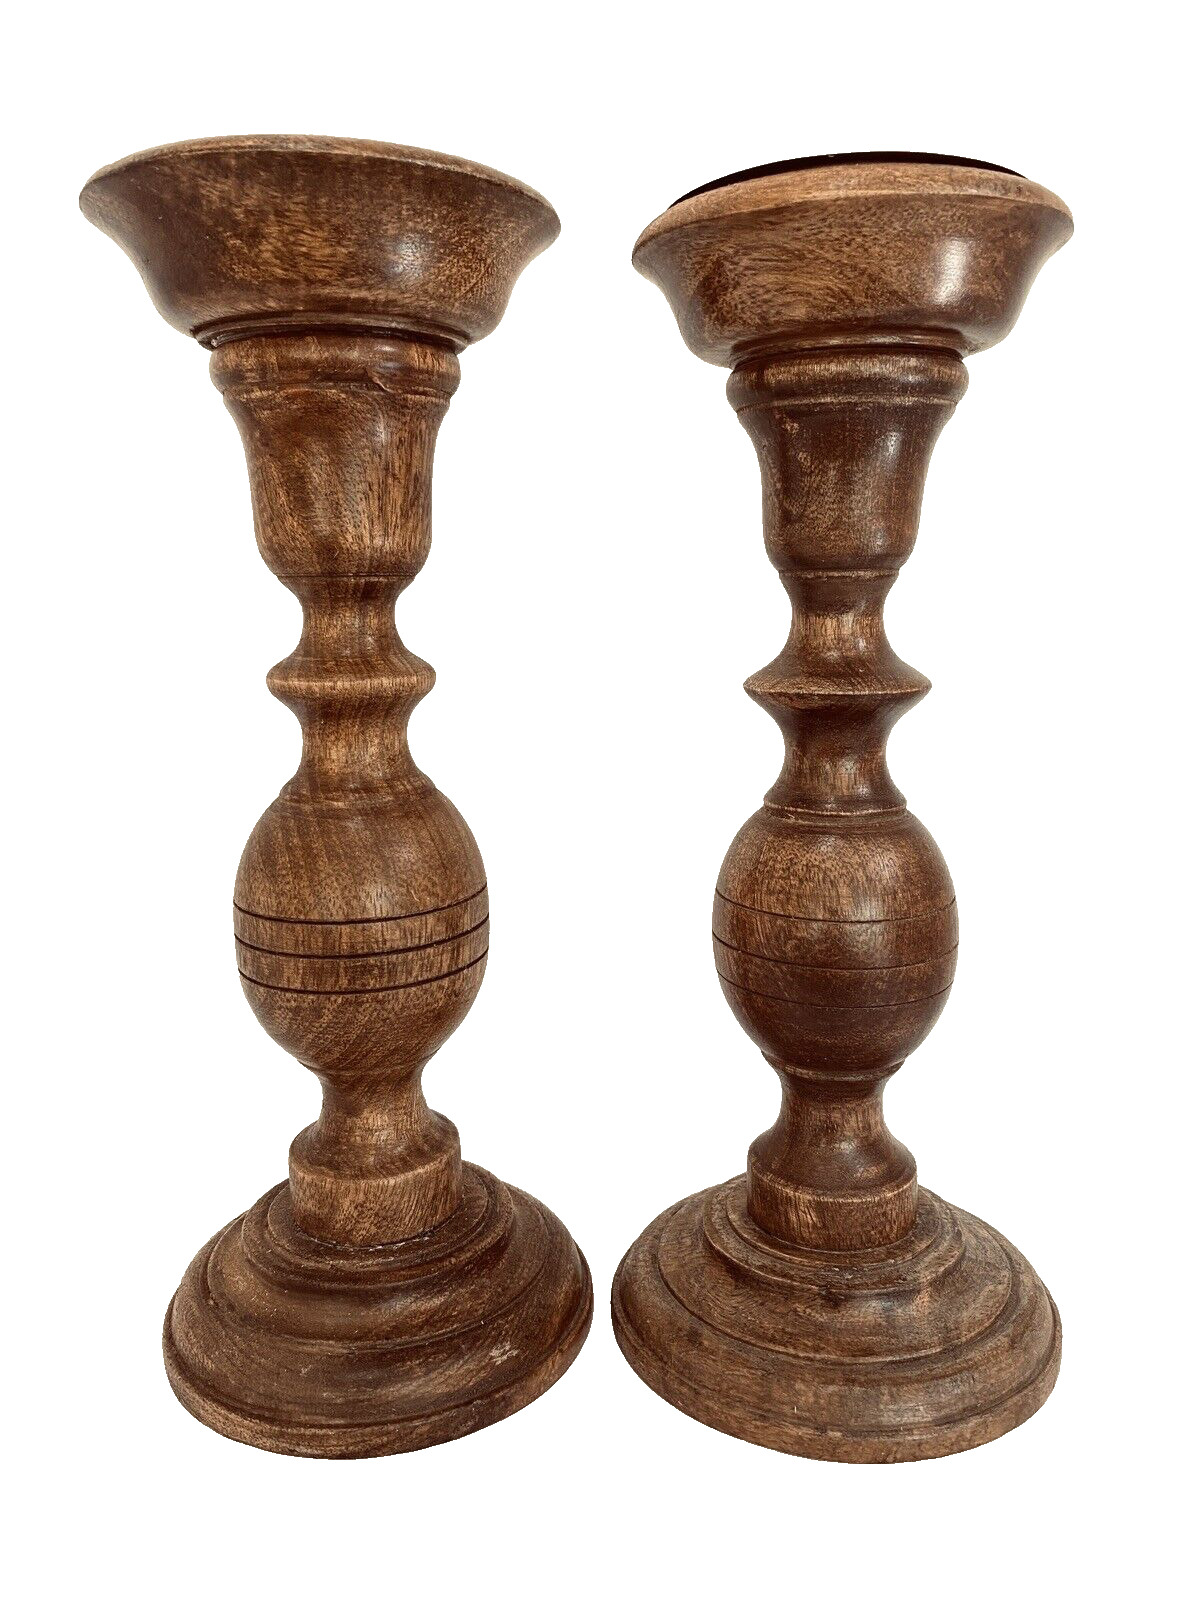 Pair Solid Wood Teak Candle Stick Holders 12” Hand Turned Boho Countrycore